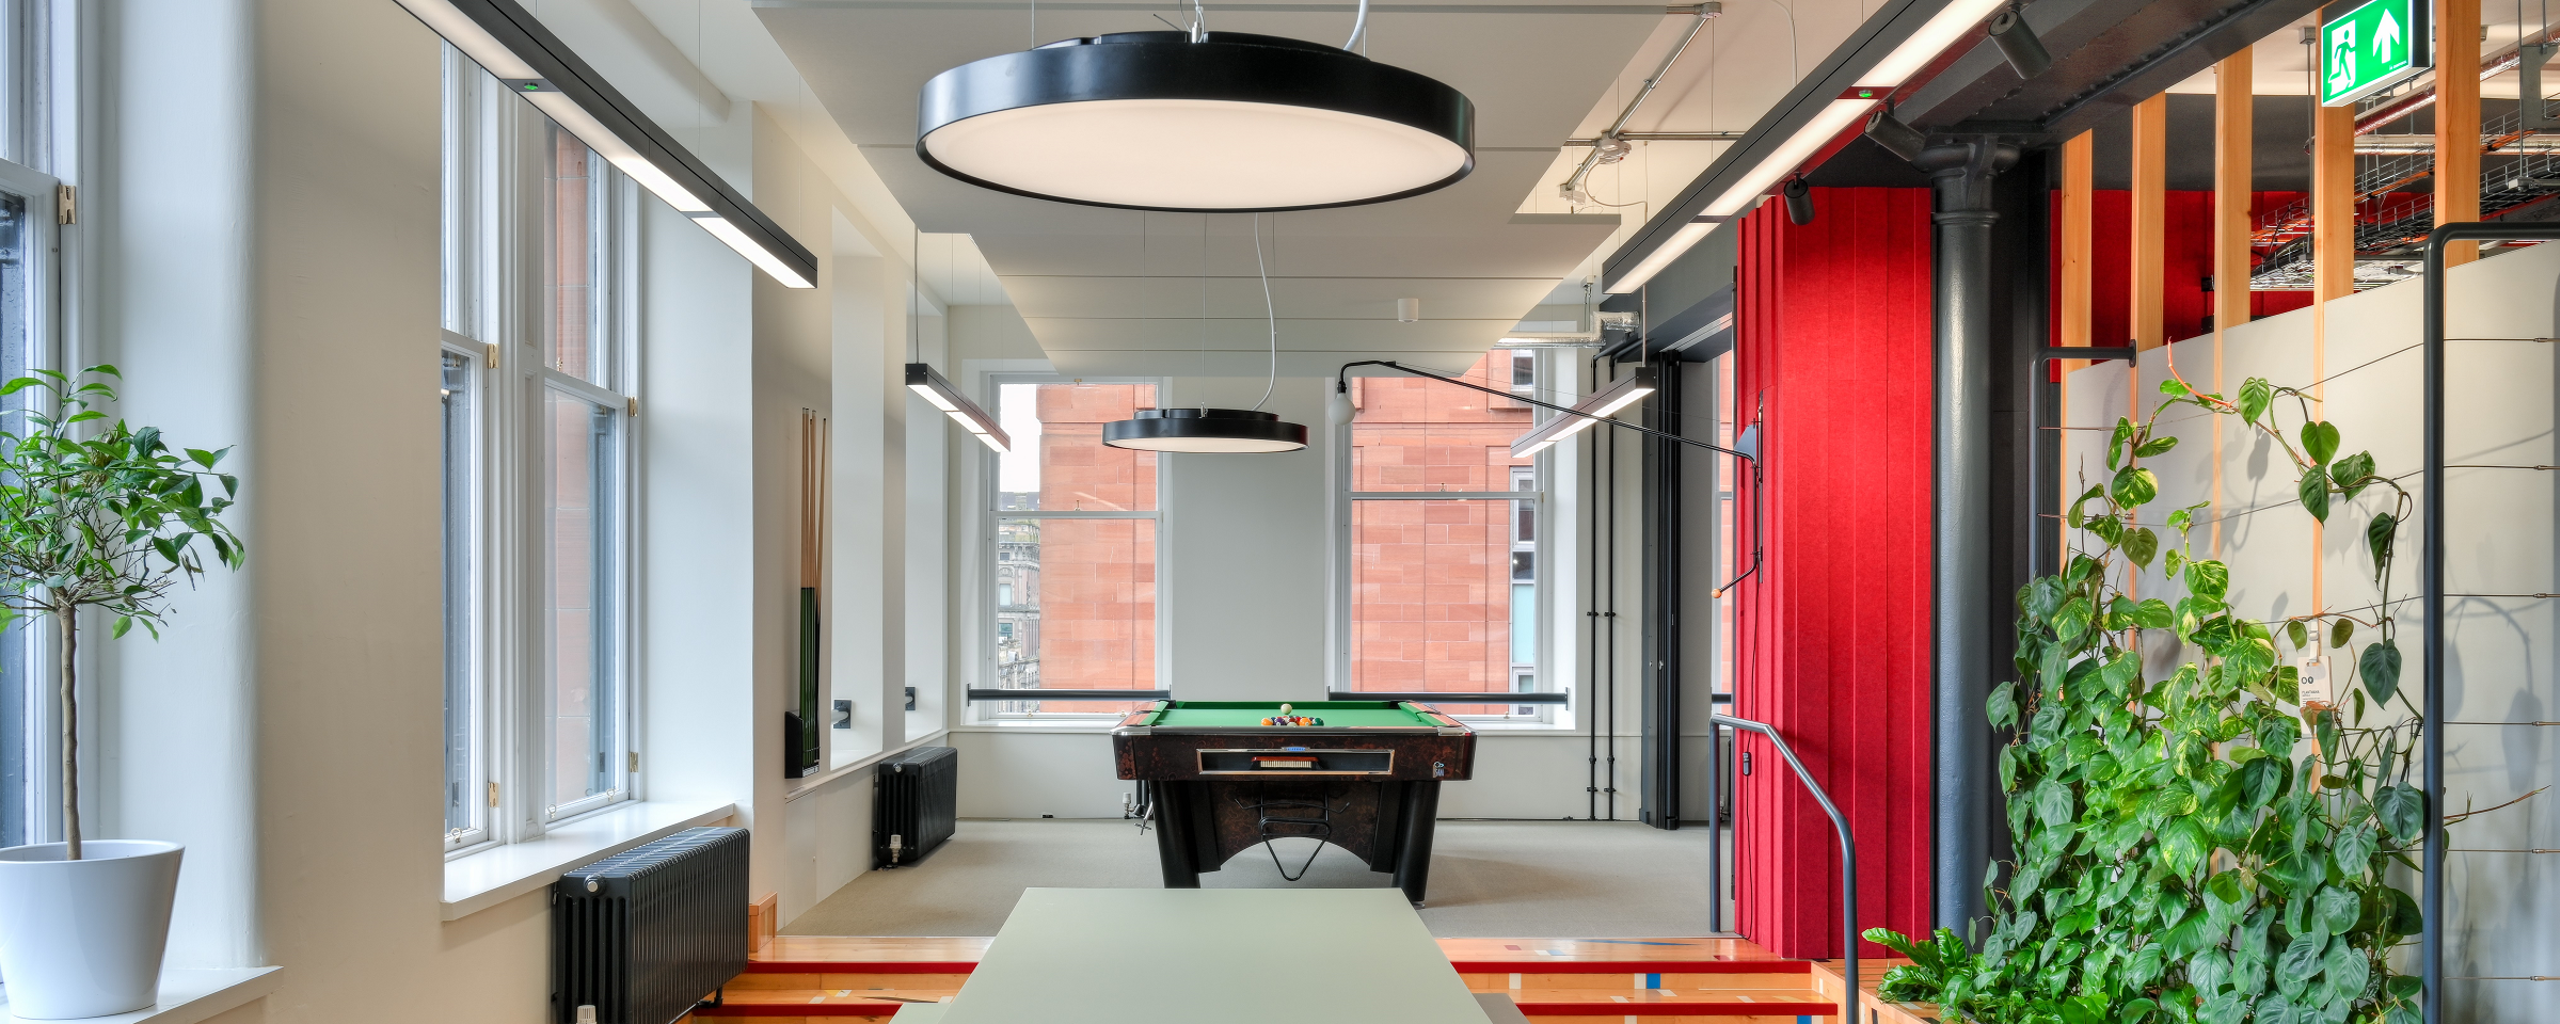 Office space with pool table, green table and green plants